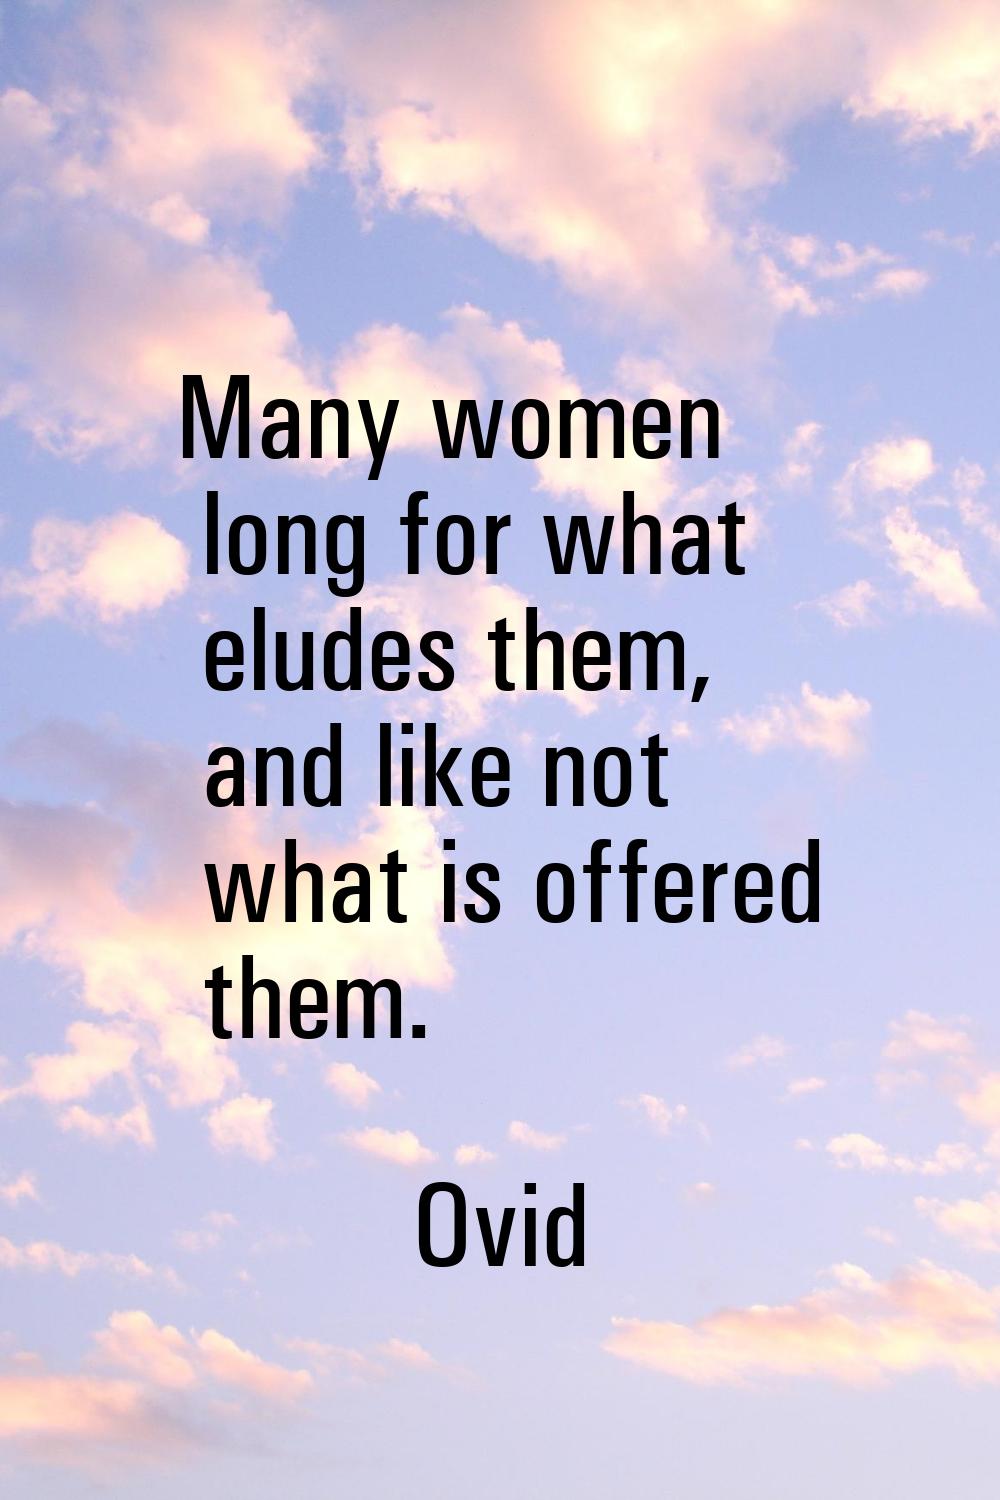 Many women long for what eludes them, and like not what is offered them.